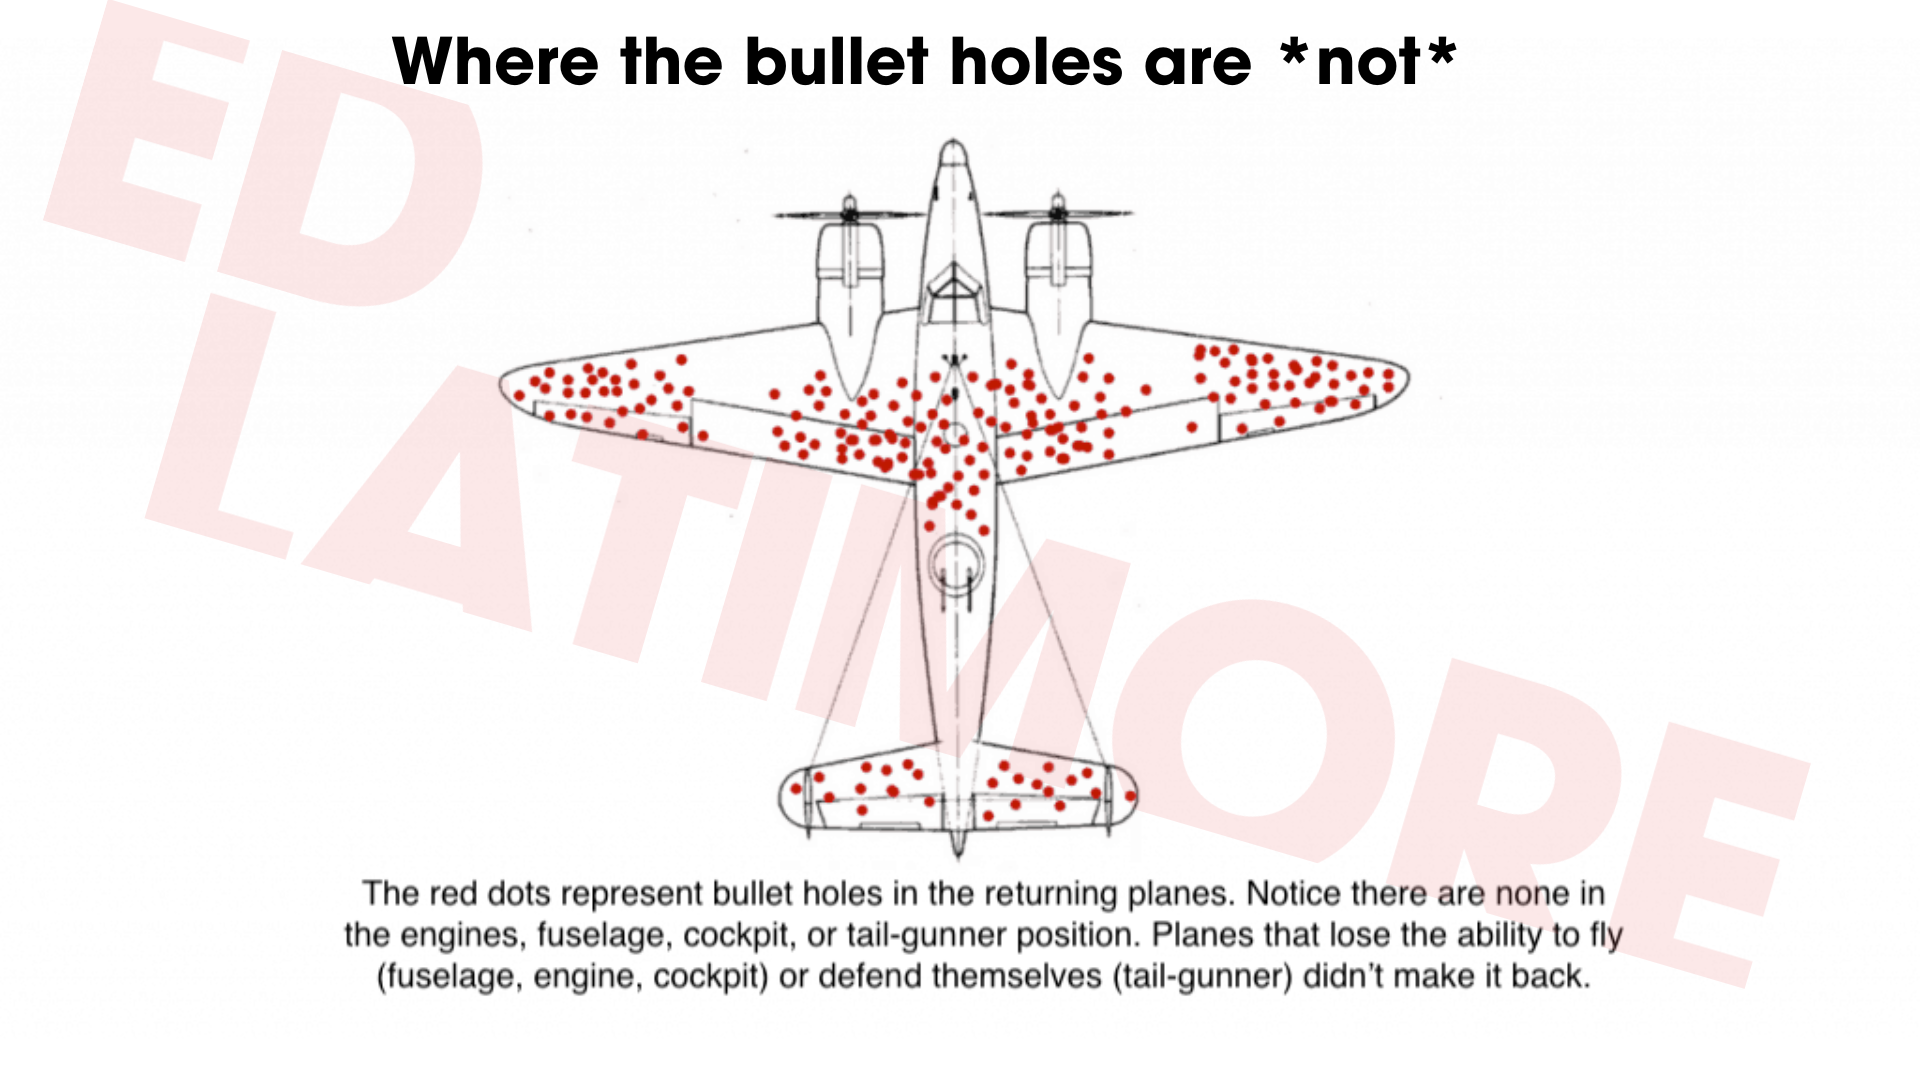 Survivor's Bias and where the bullet holes are not